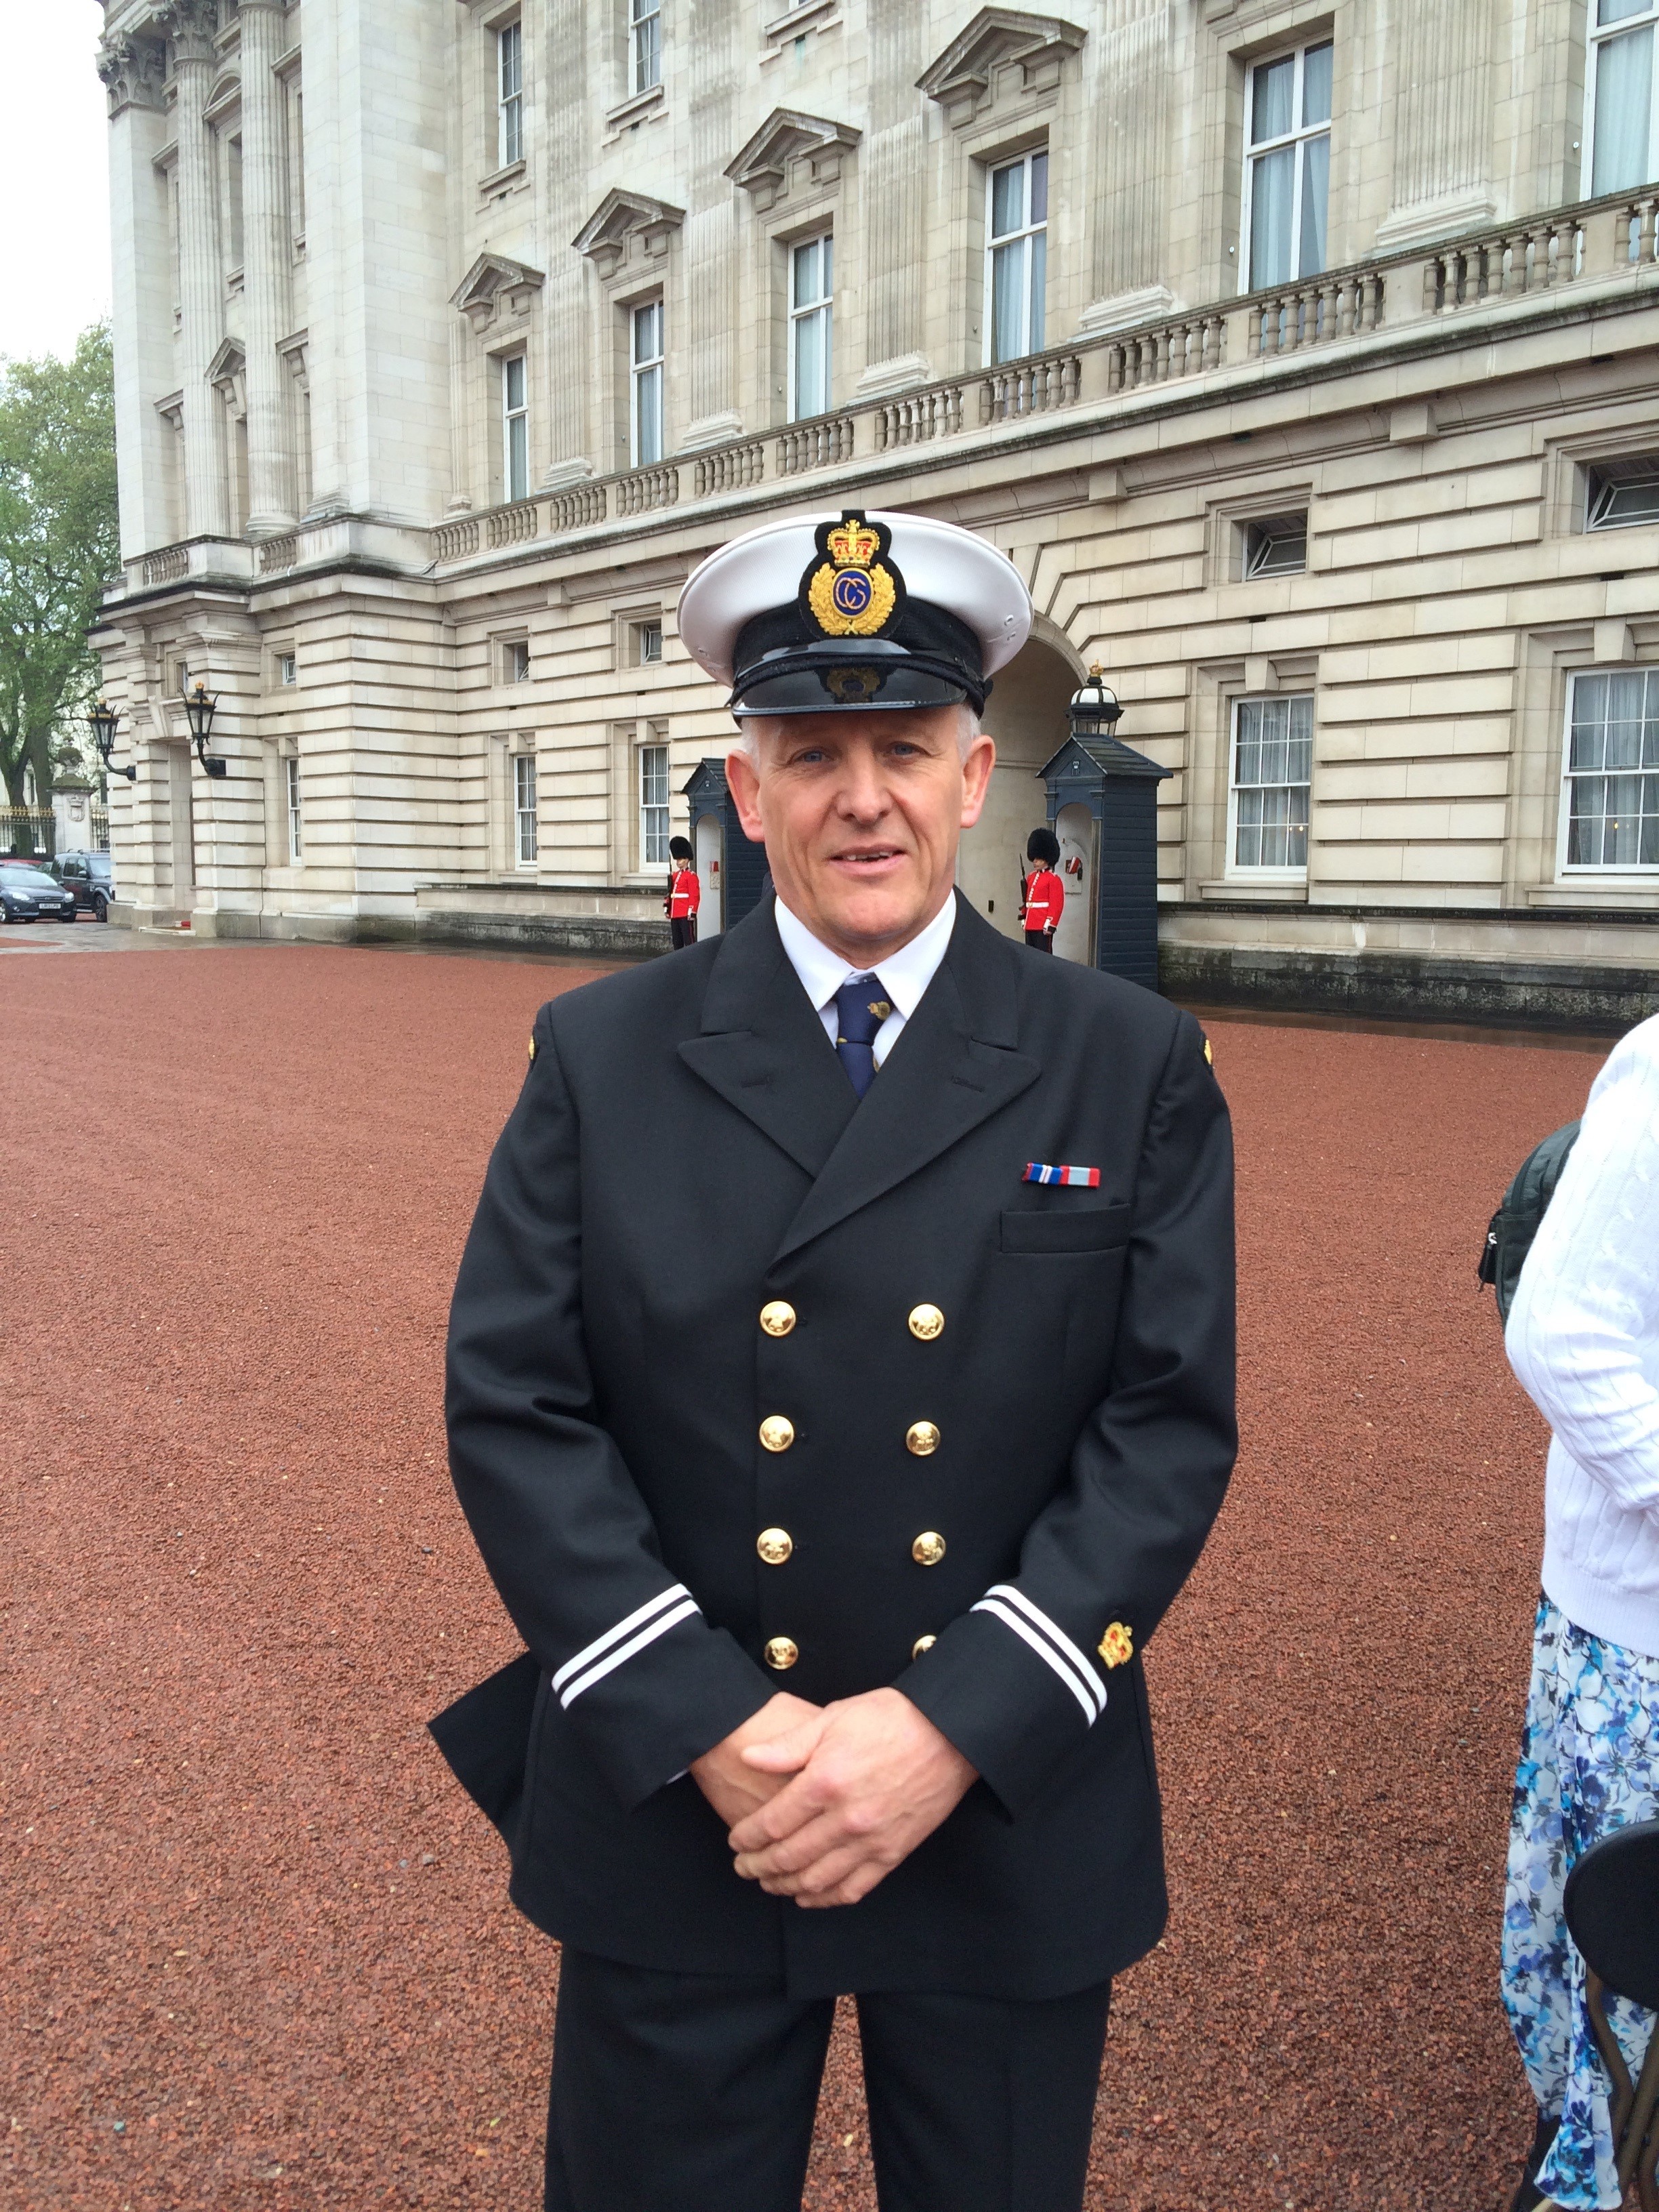 Male Coastguard in dress uniform poses in front of Buckingham Palace